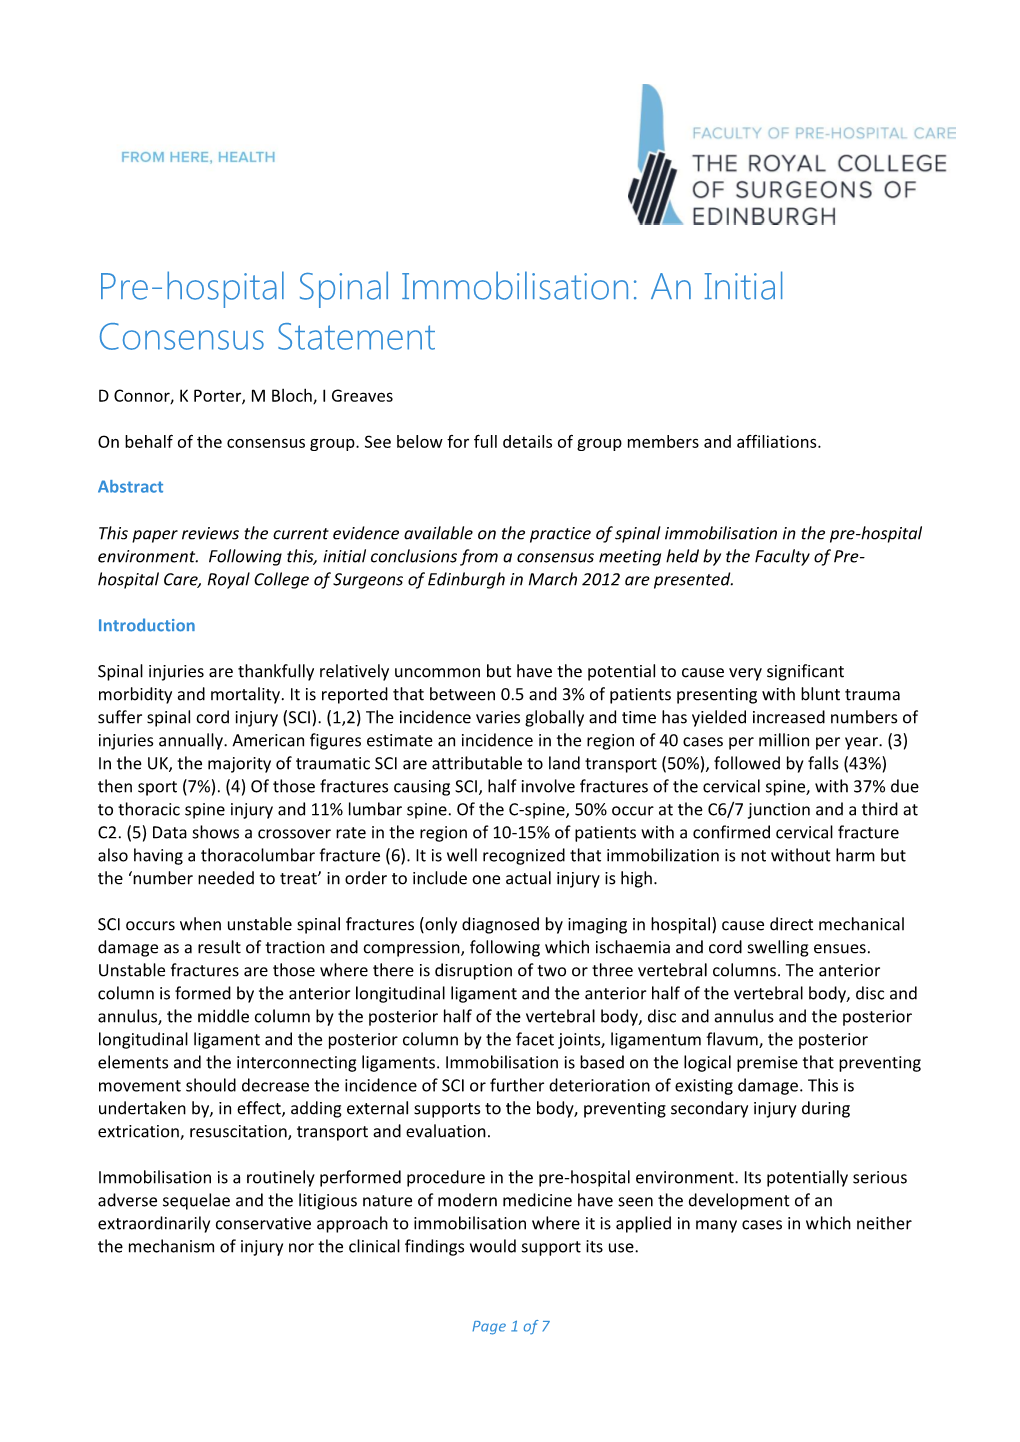 Pre-Hospital Spinal Immobilisation: an Initial Consensus Statement